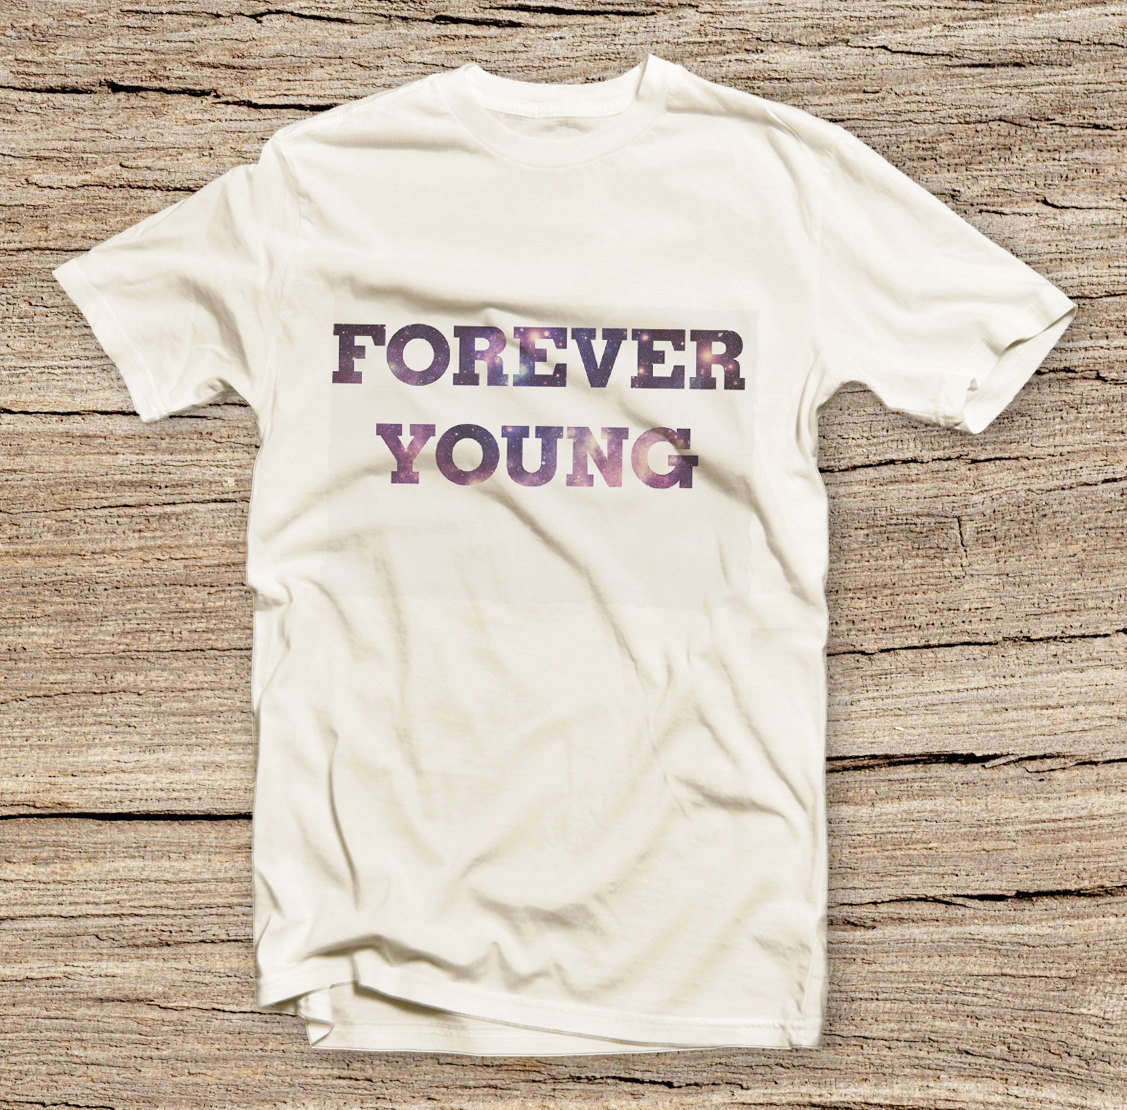 Pts-037 Forever Young T-shirt, Fashion Style Printed T-shirt